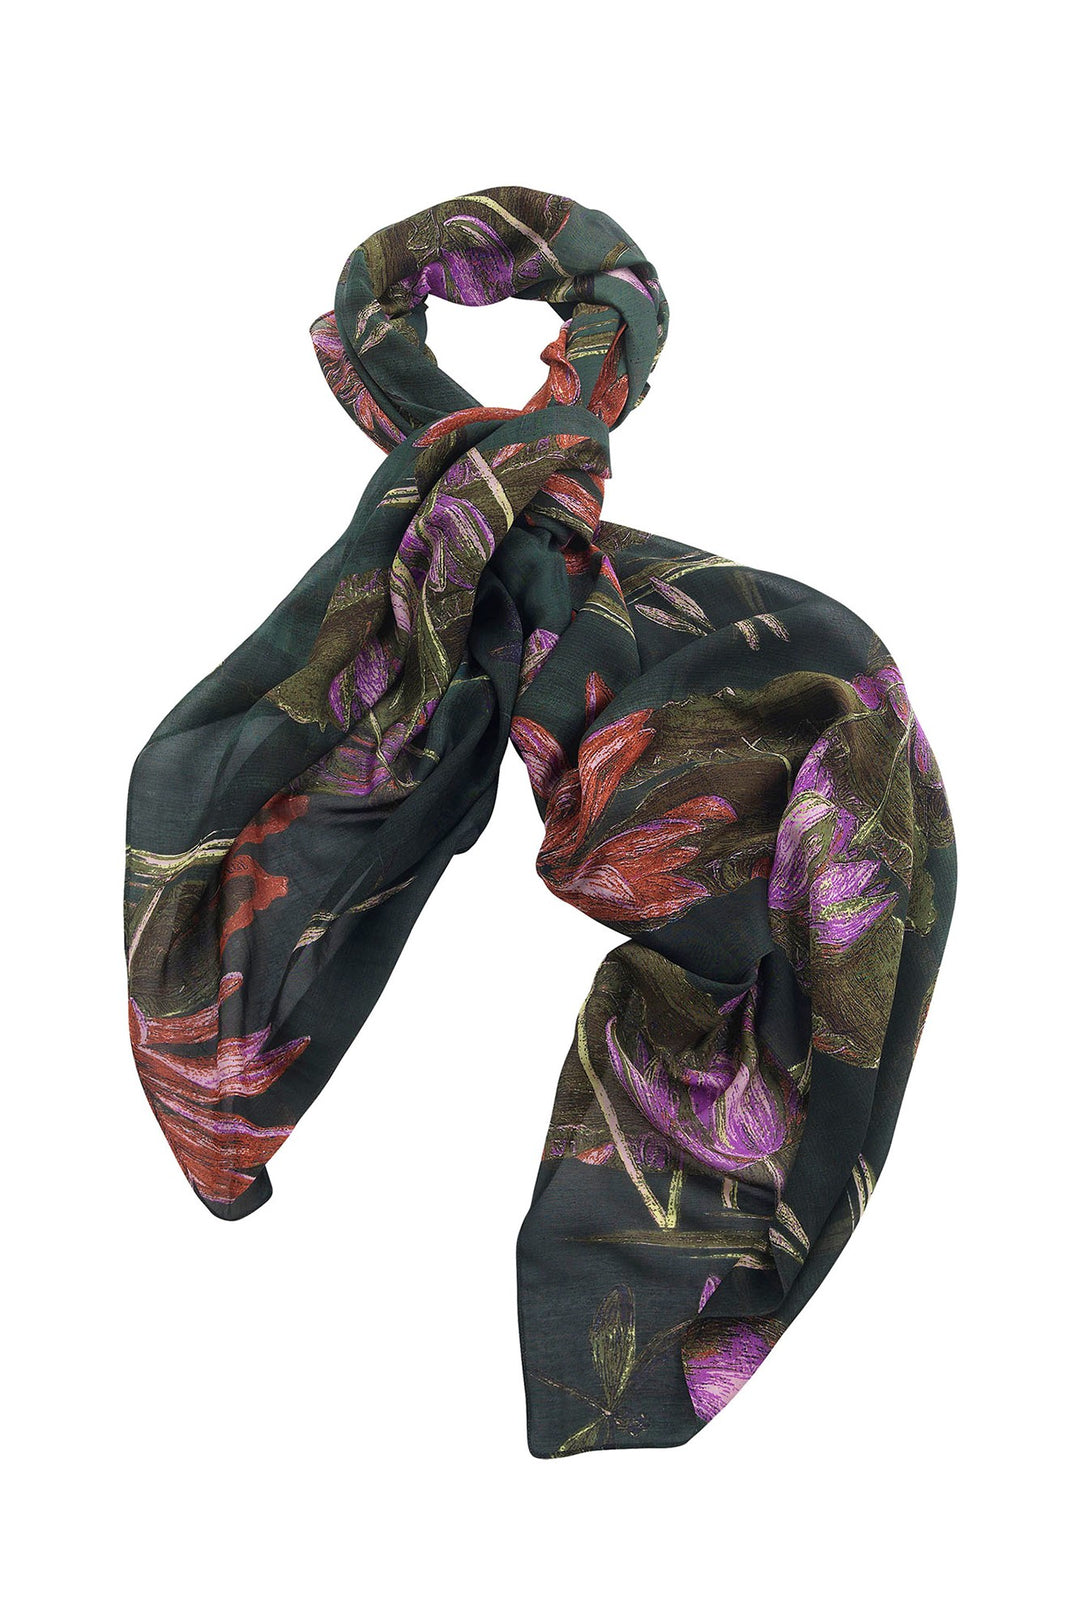 Marianne North Indian Lily Scarf- Our scarves are a full 100cm x 200cm making them perfect for layering in the winter months or worn as a delicate cover up during the summer seasons. 